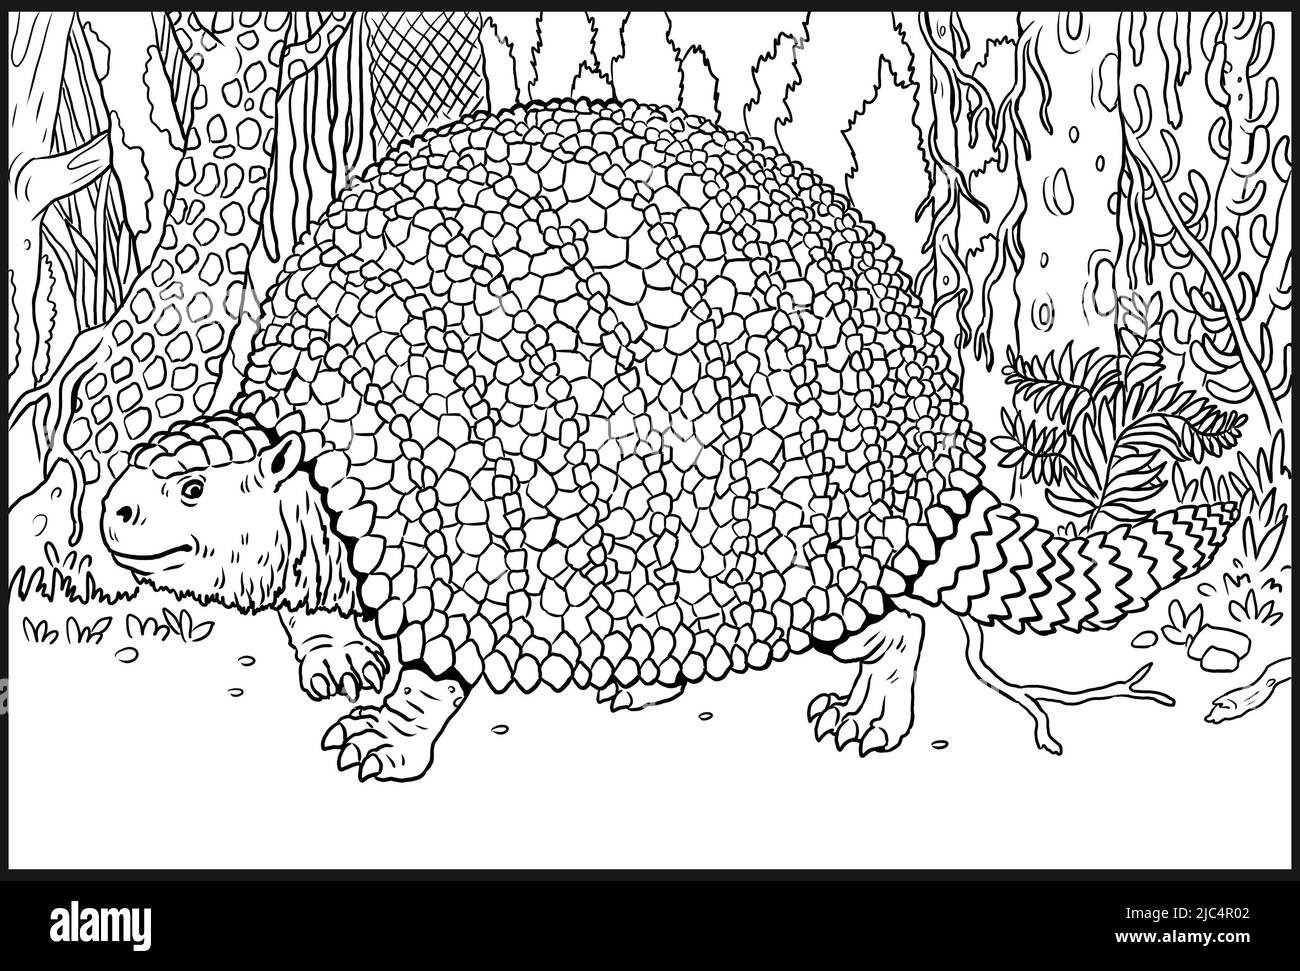 Prehistoric animals - glyptodon. Drawing with extinct mammals. Silhouette drawing for coloring book. Stock Photo